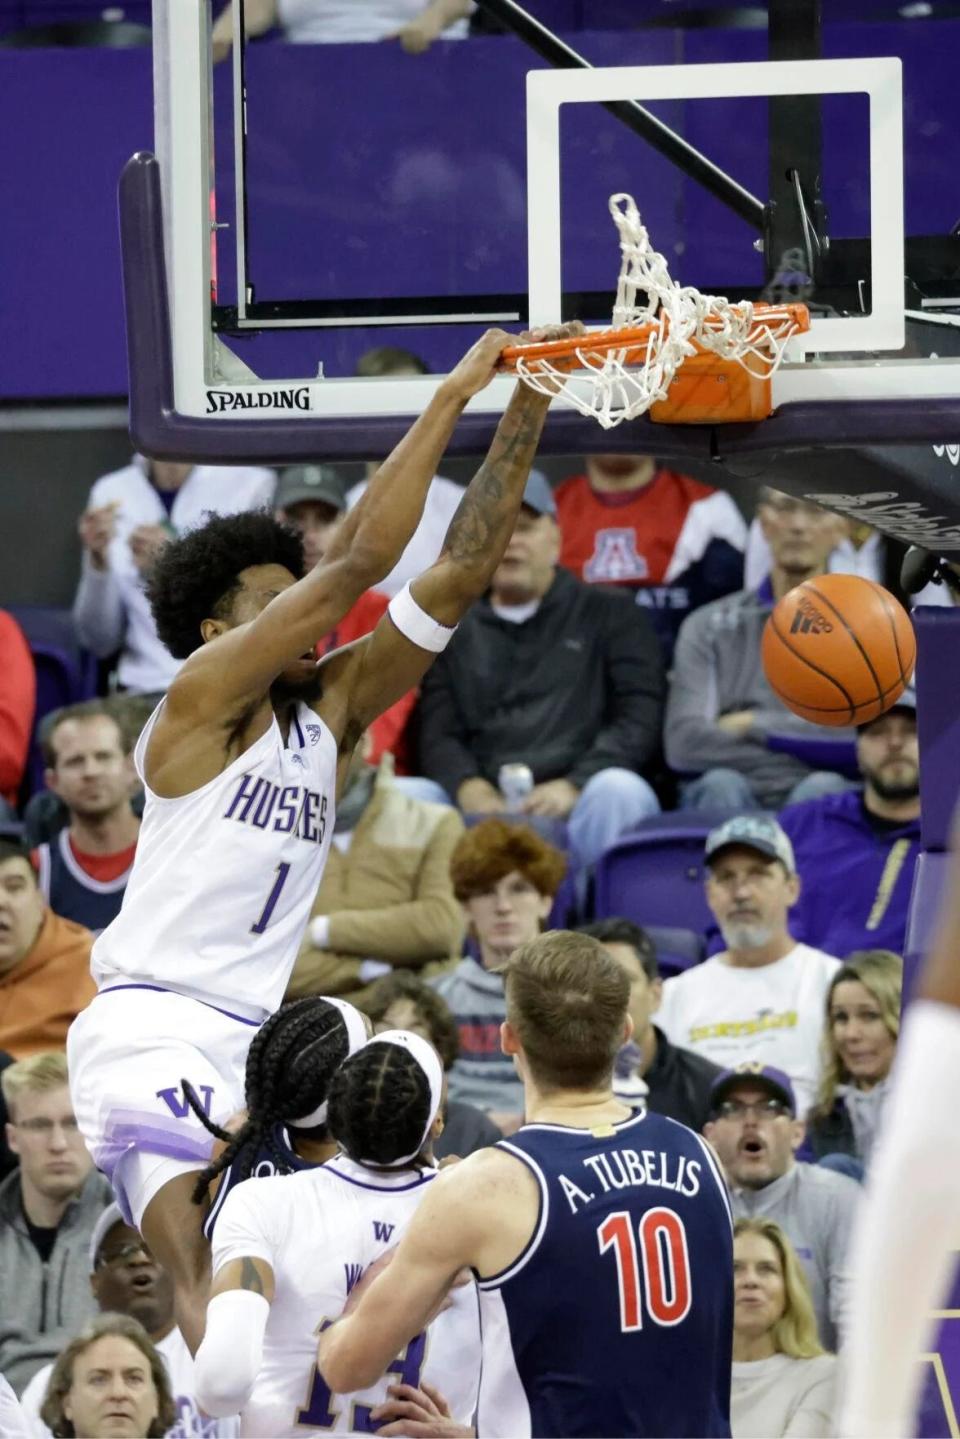 Washington forward Keion Brooks, who once played for UK, dunks during a game against Arizona in January 2023.